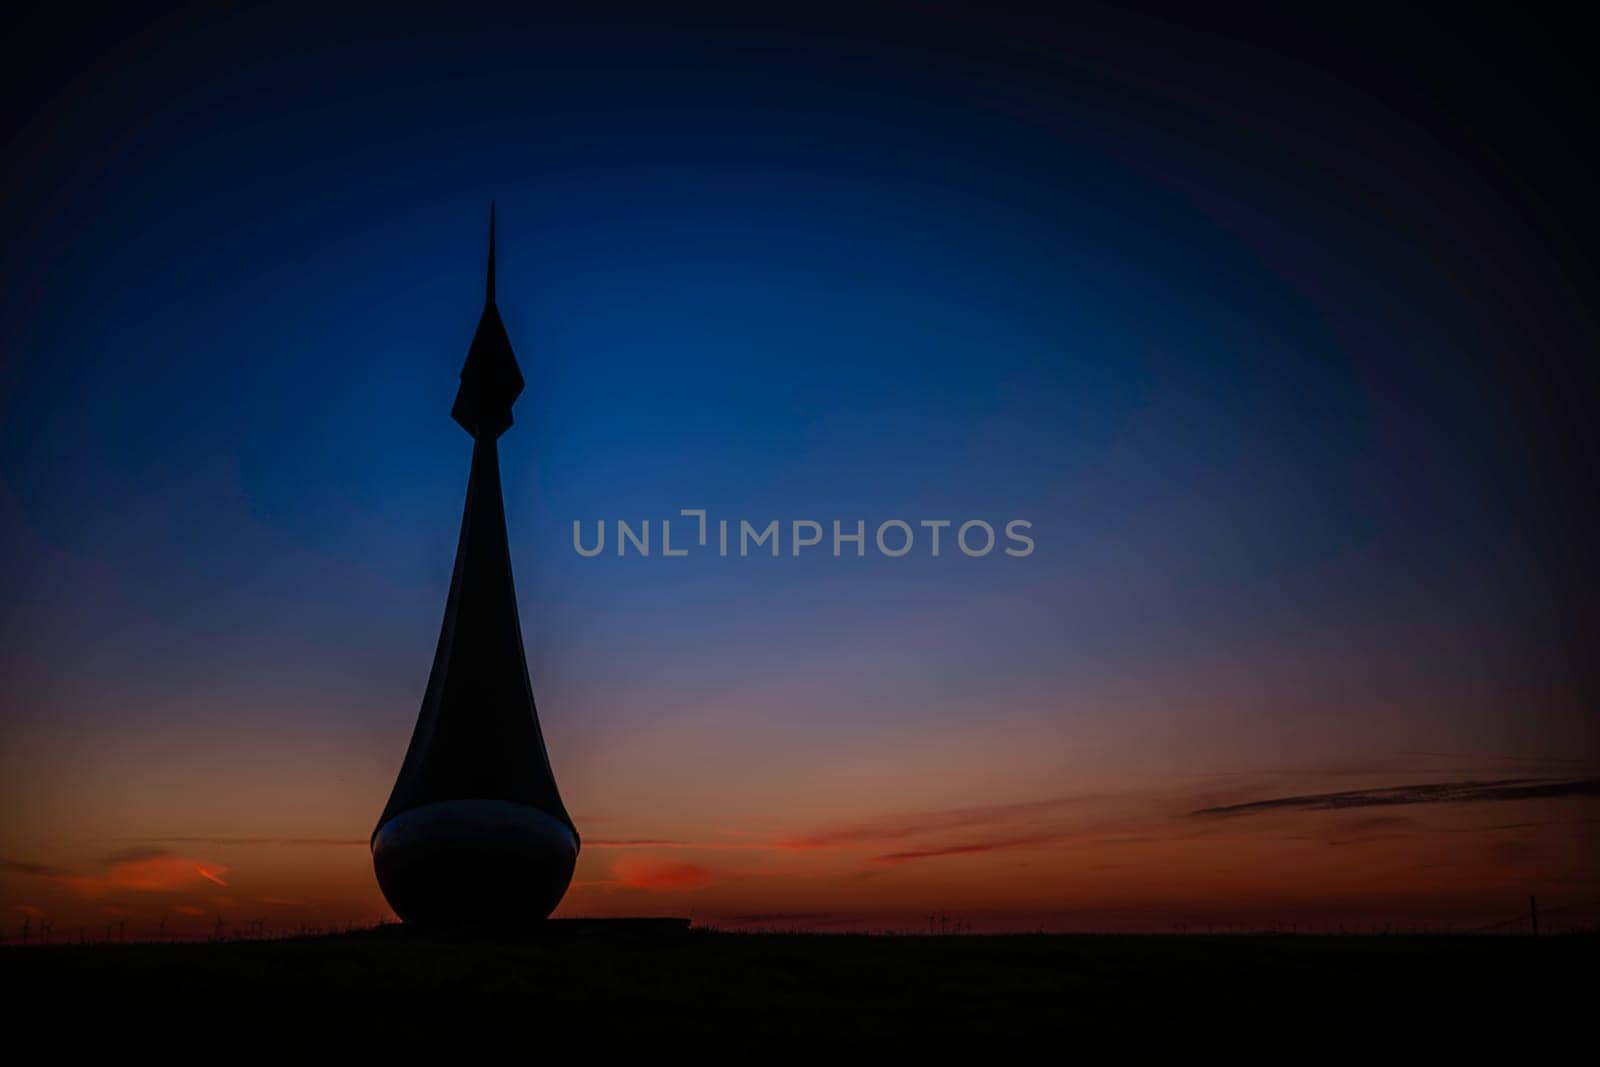 a buoy on the field in groningen during sunset with red and blue sky